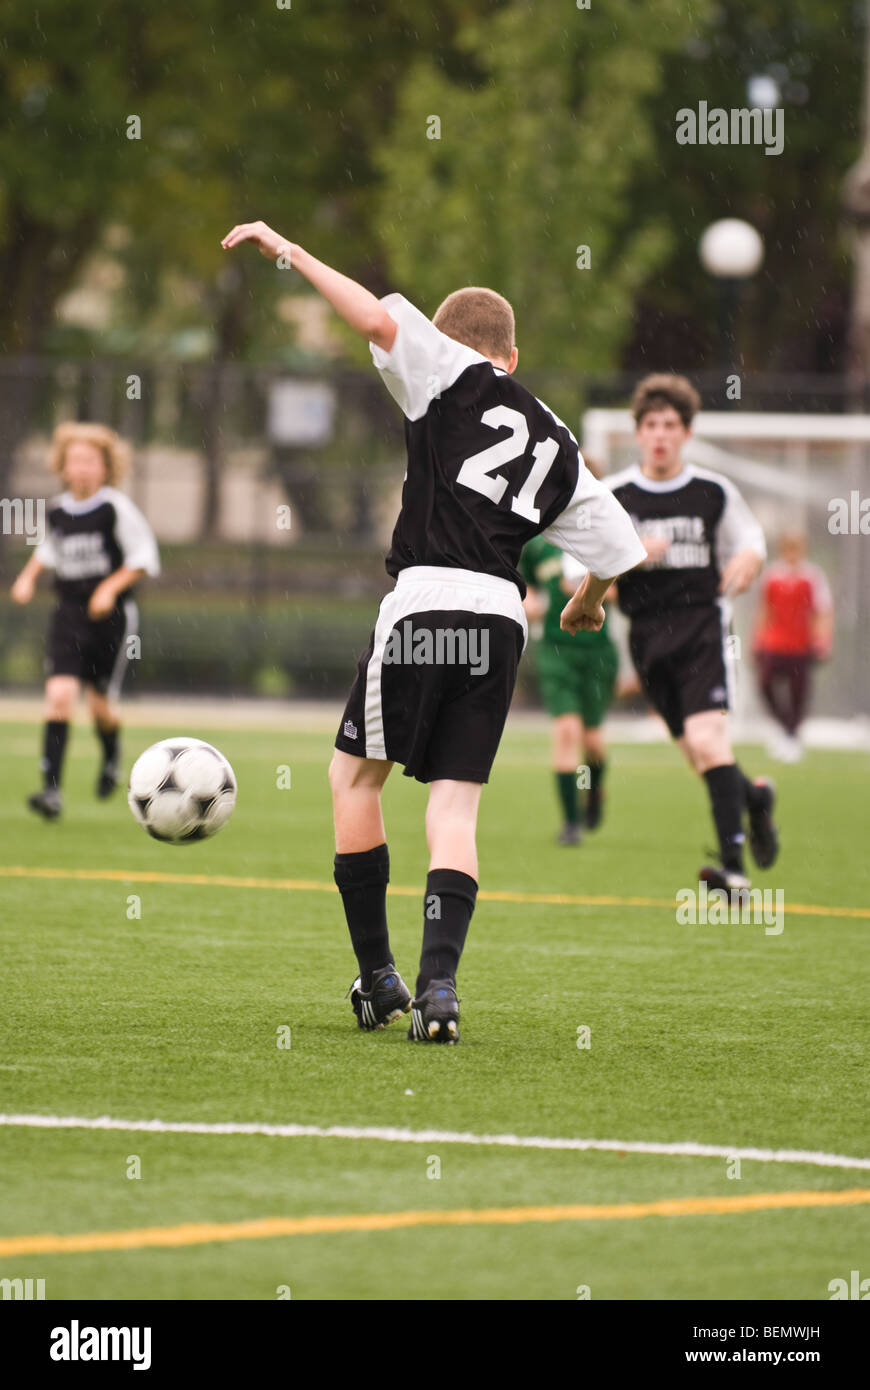 A youth soccer match. Stock Photo